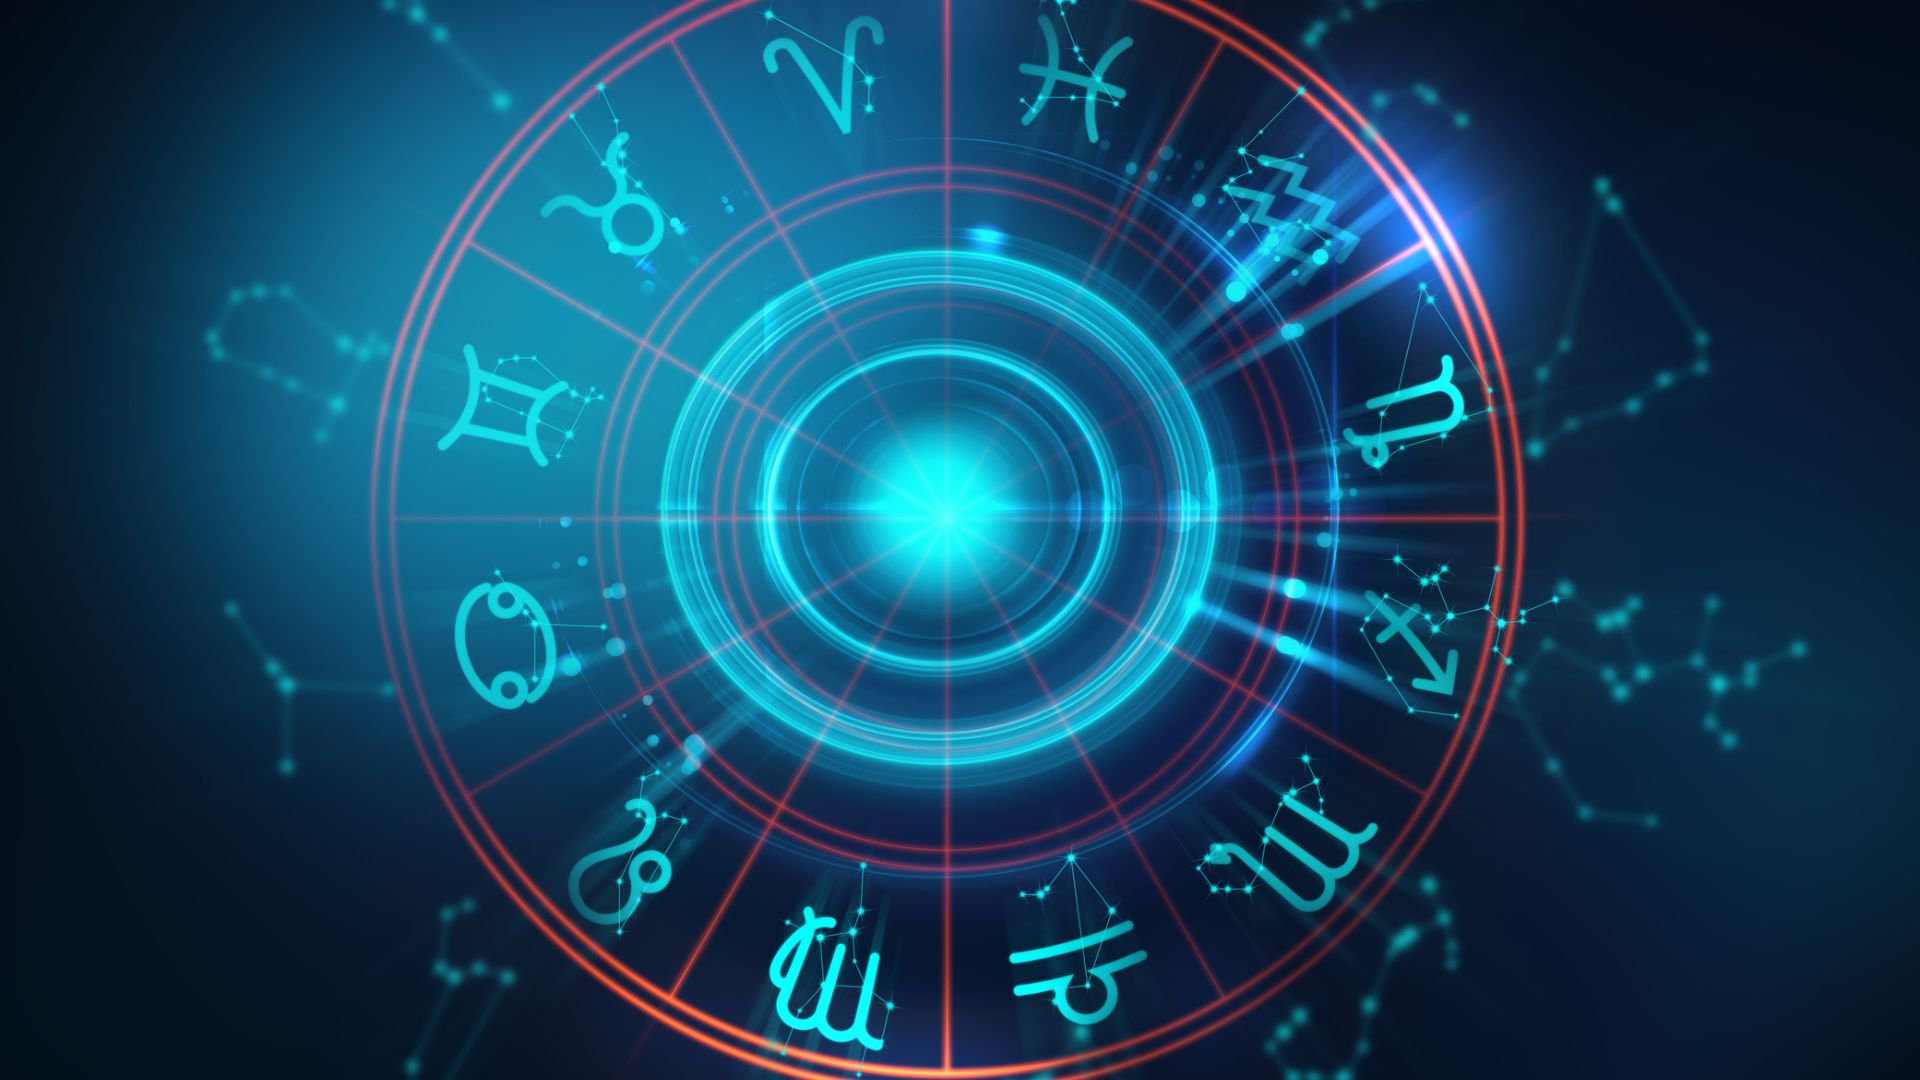 Zodiac Signs In Circle With Blue Color Theme